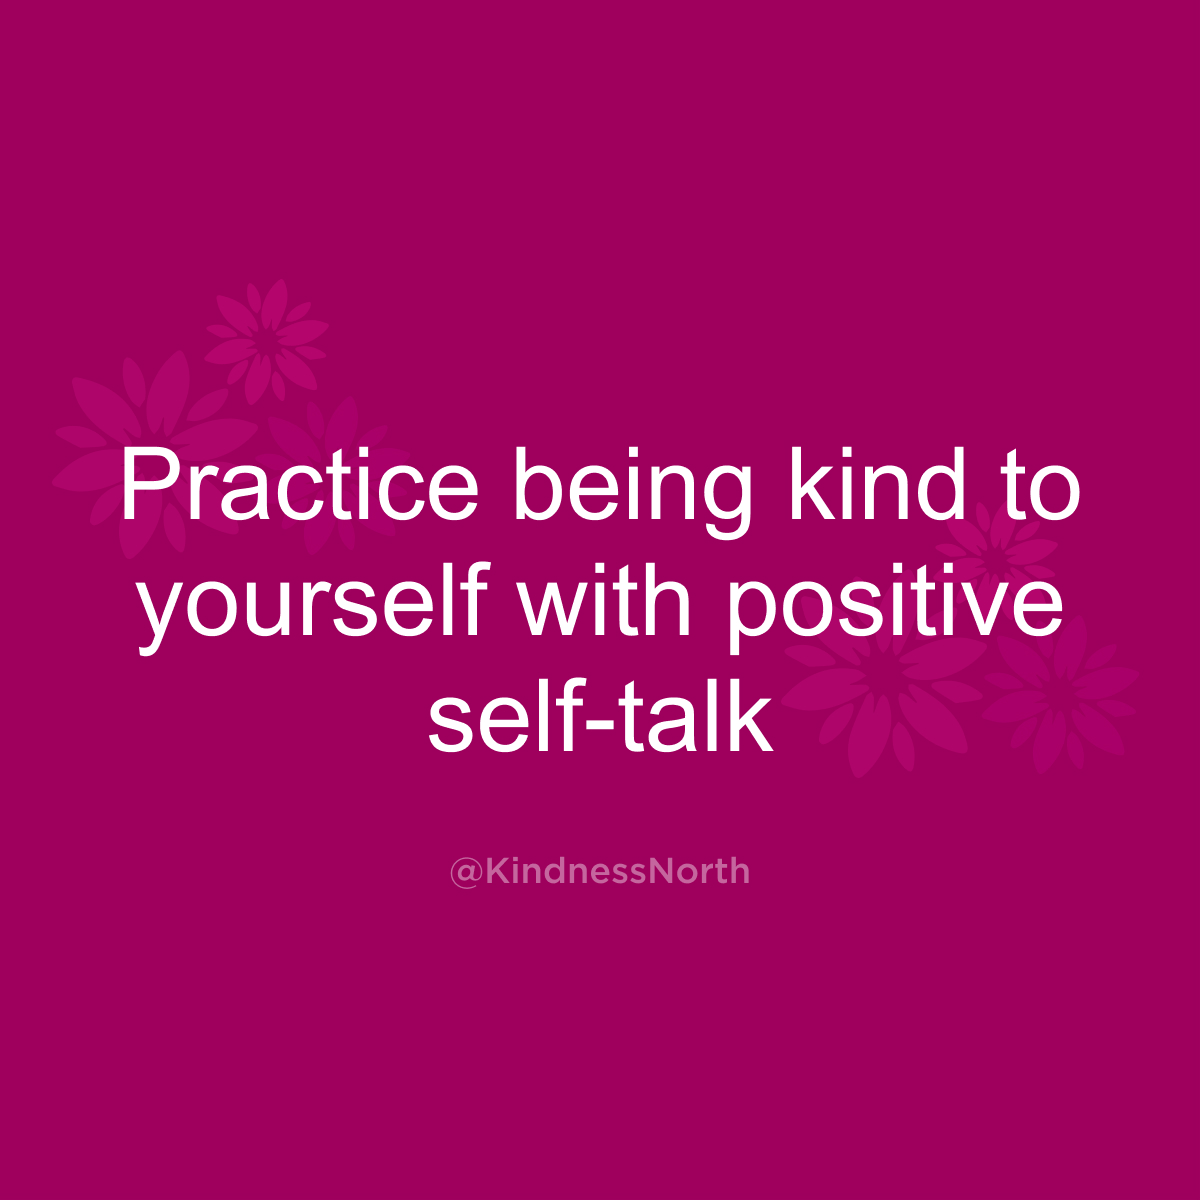 Practice being kind to yourself with positive self-talk